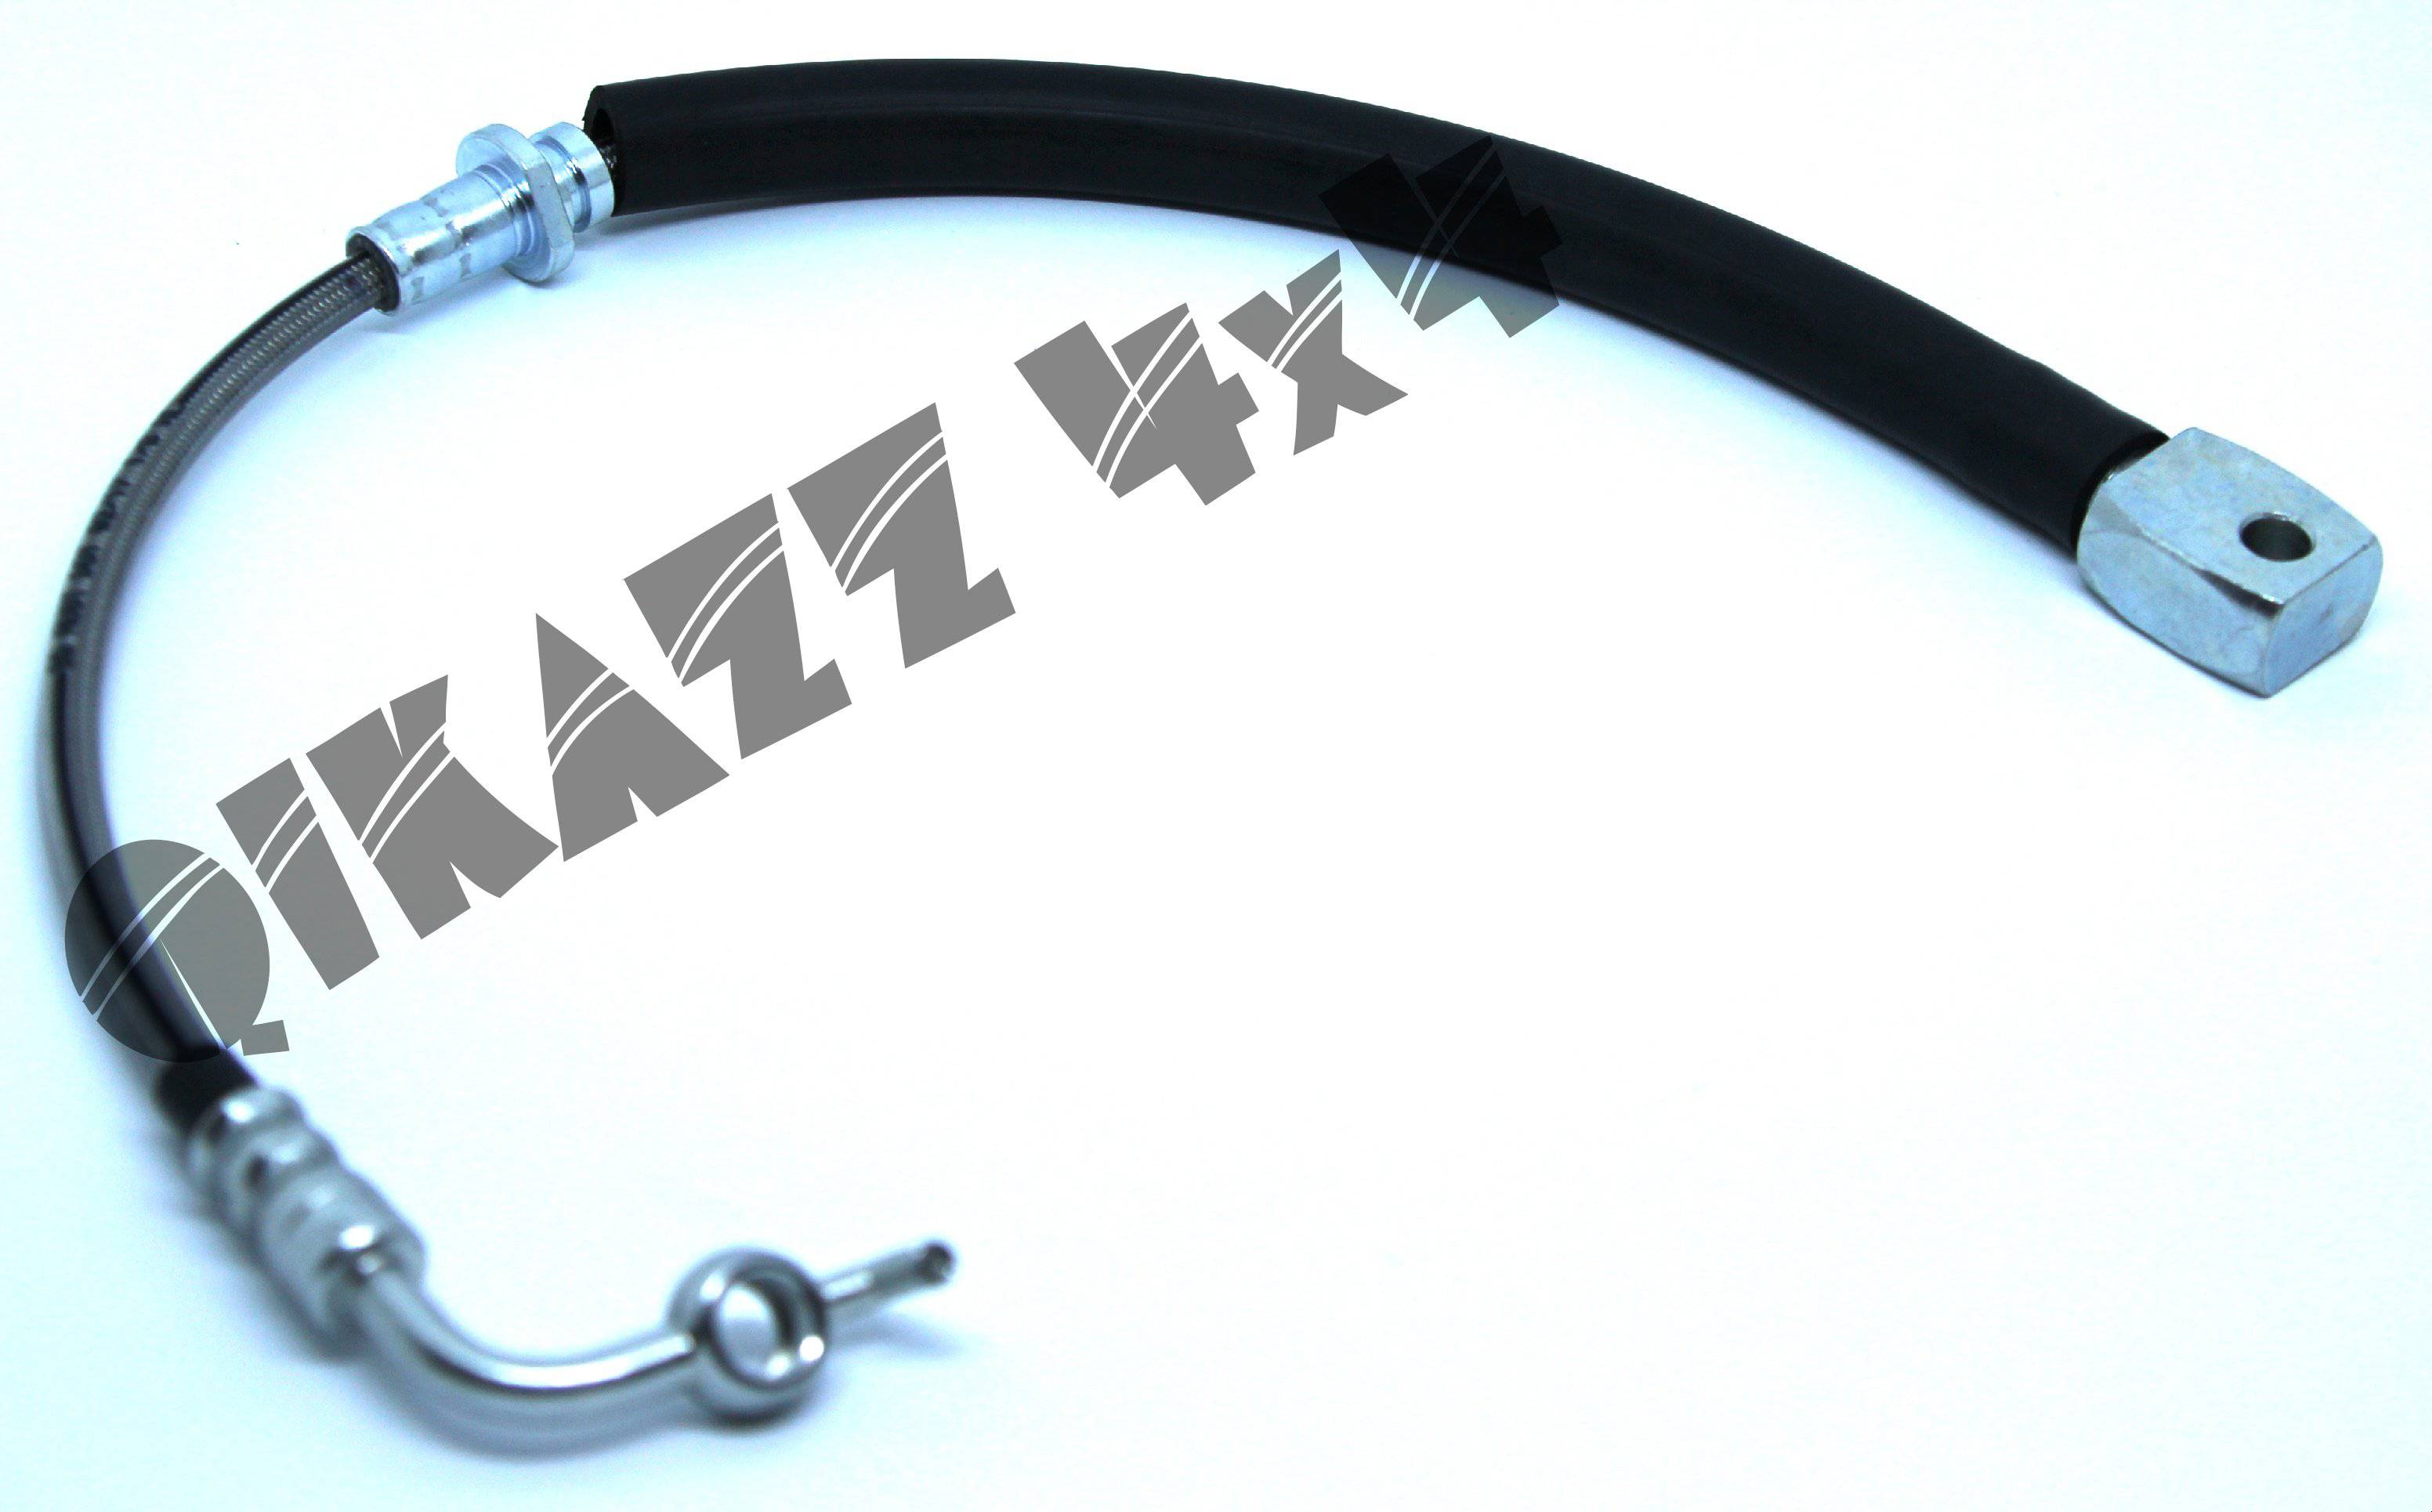 Clutch Hose Braided Stainless for Nissan Patrol GQ TB42 / TD42 | QIKAZZ 4x4 & Camping